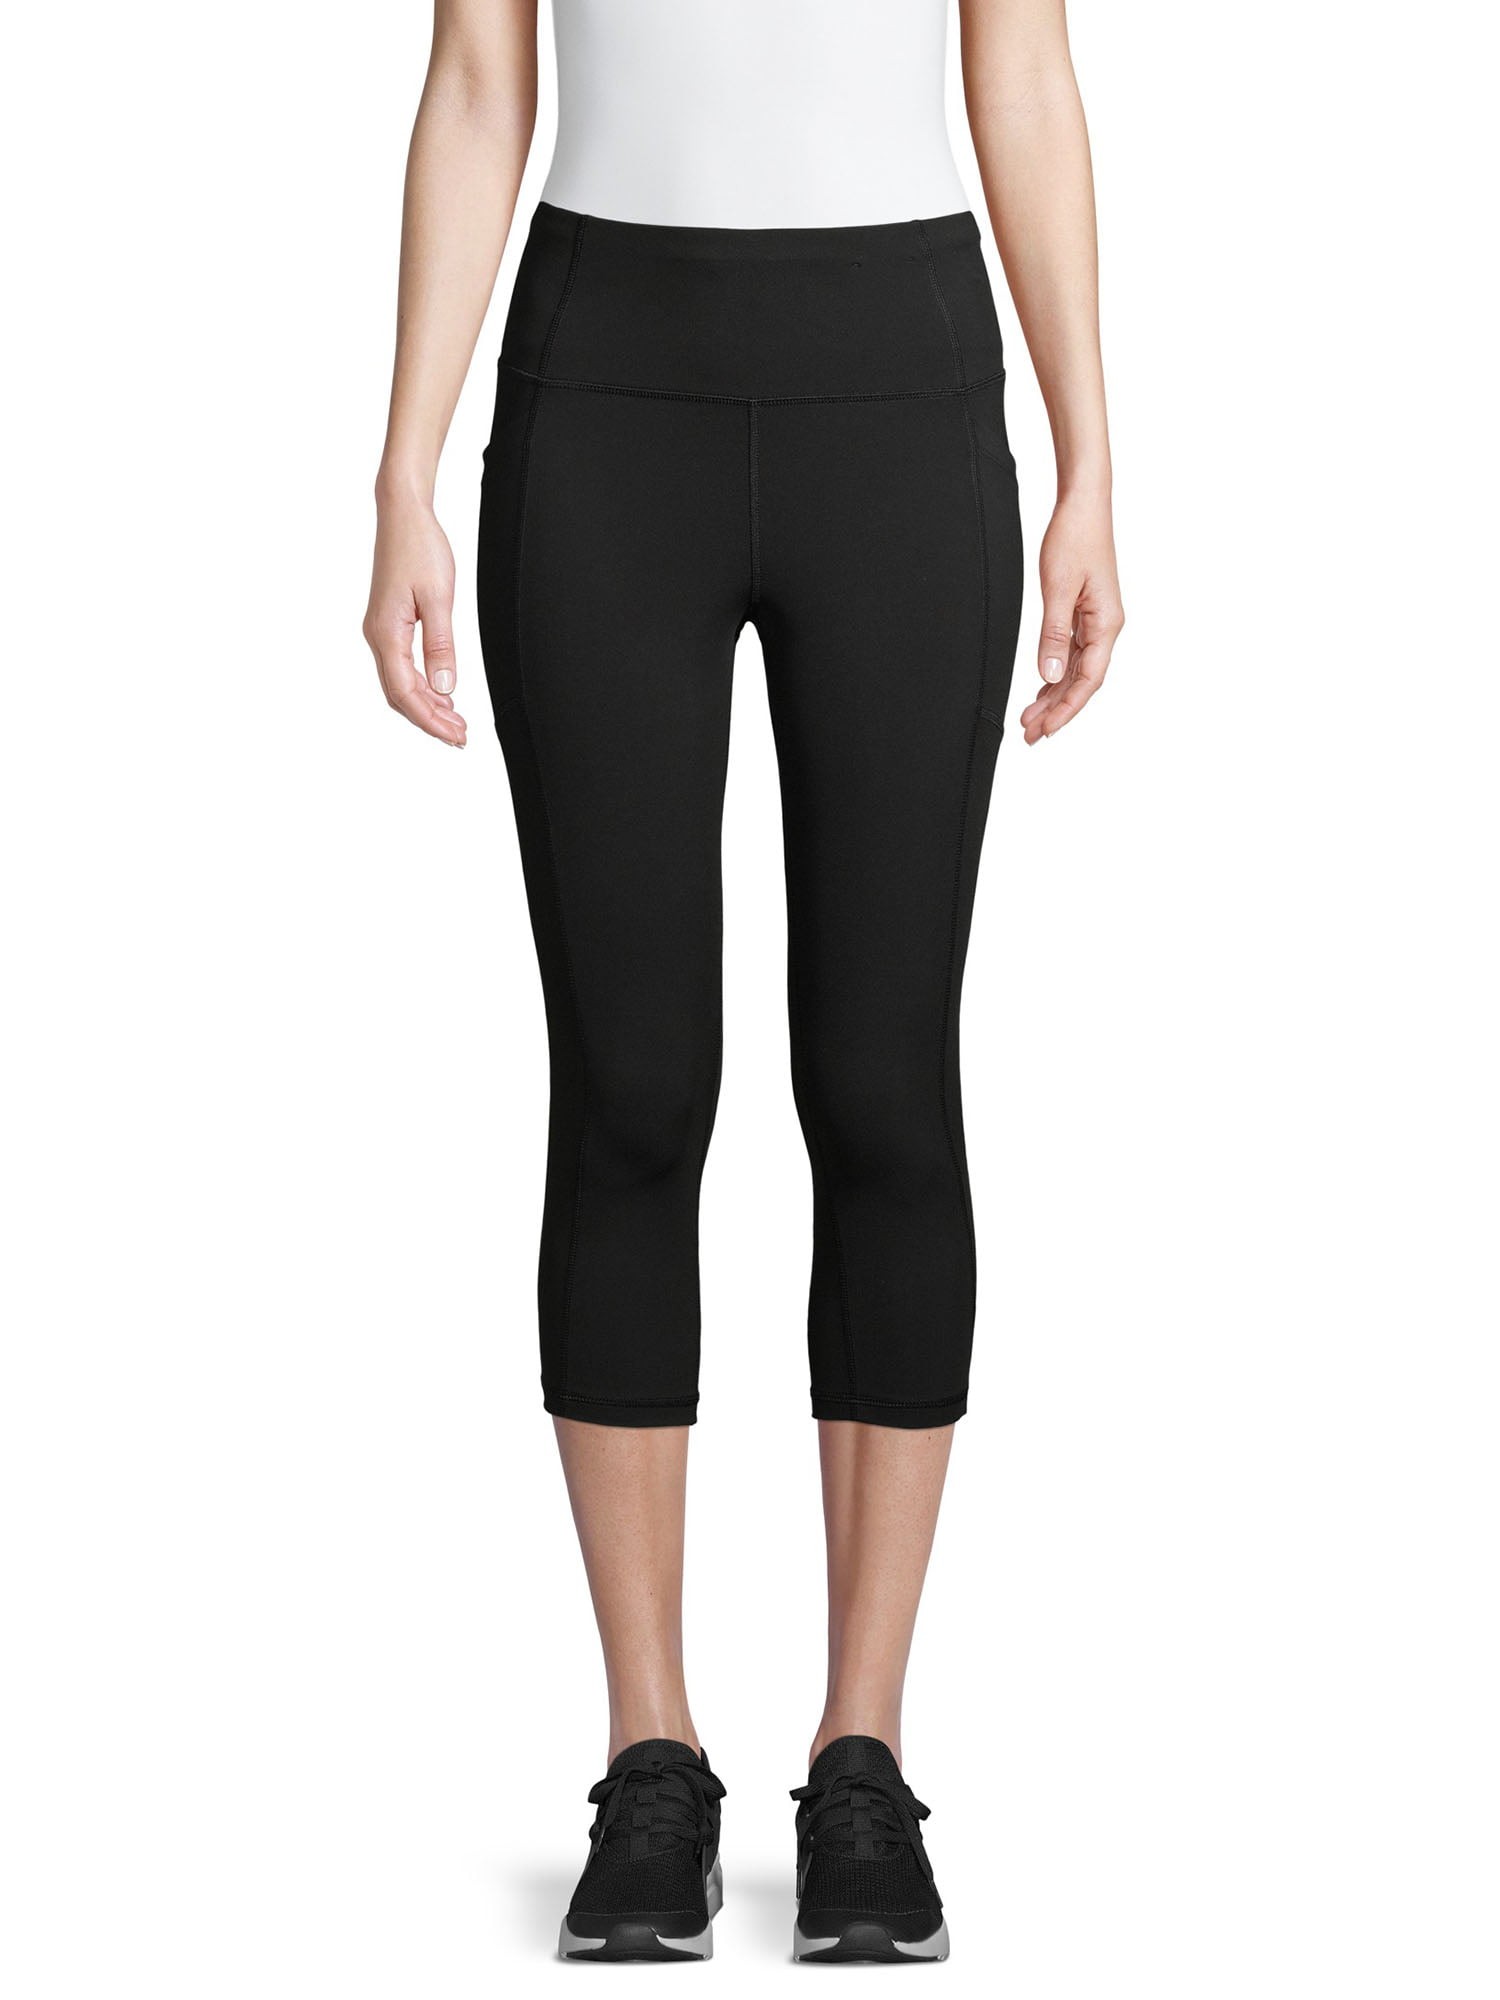 Avia Women's Performance Leggings with Ribbed Insets 